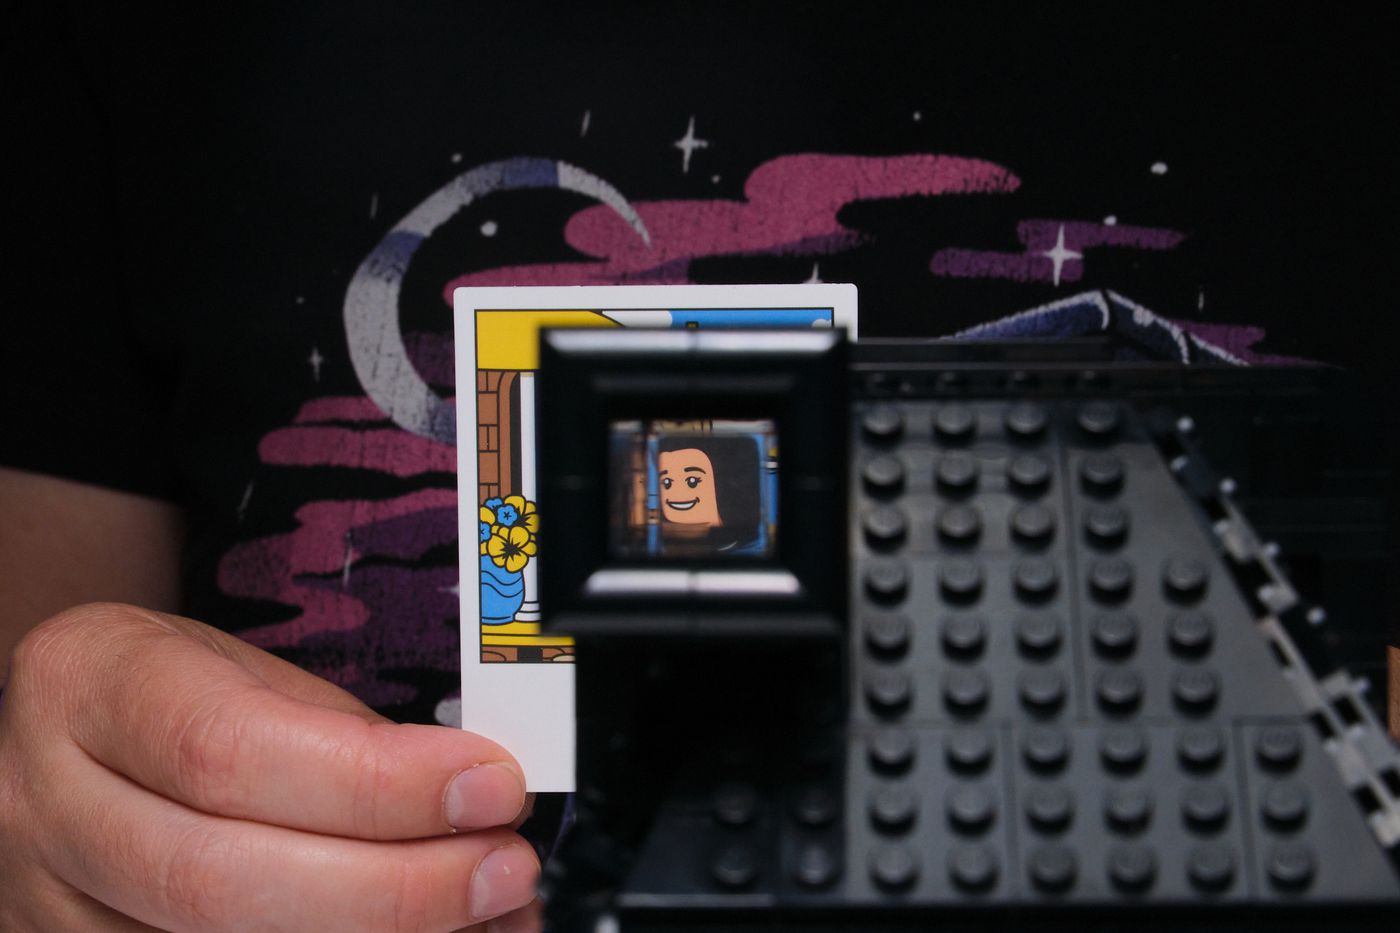 Looking through the Lego viewfinder, we get a narrow look at the Lego-ified face of the fan designer’s sister.